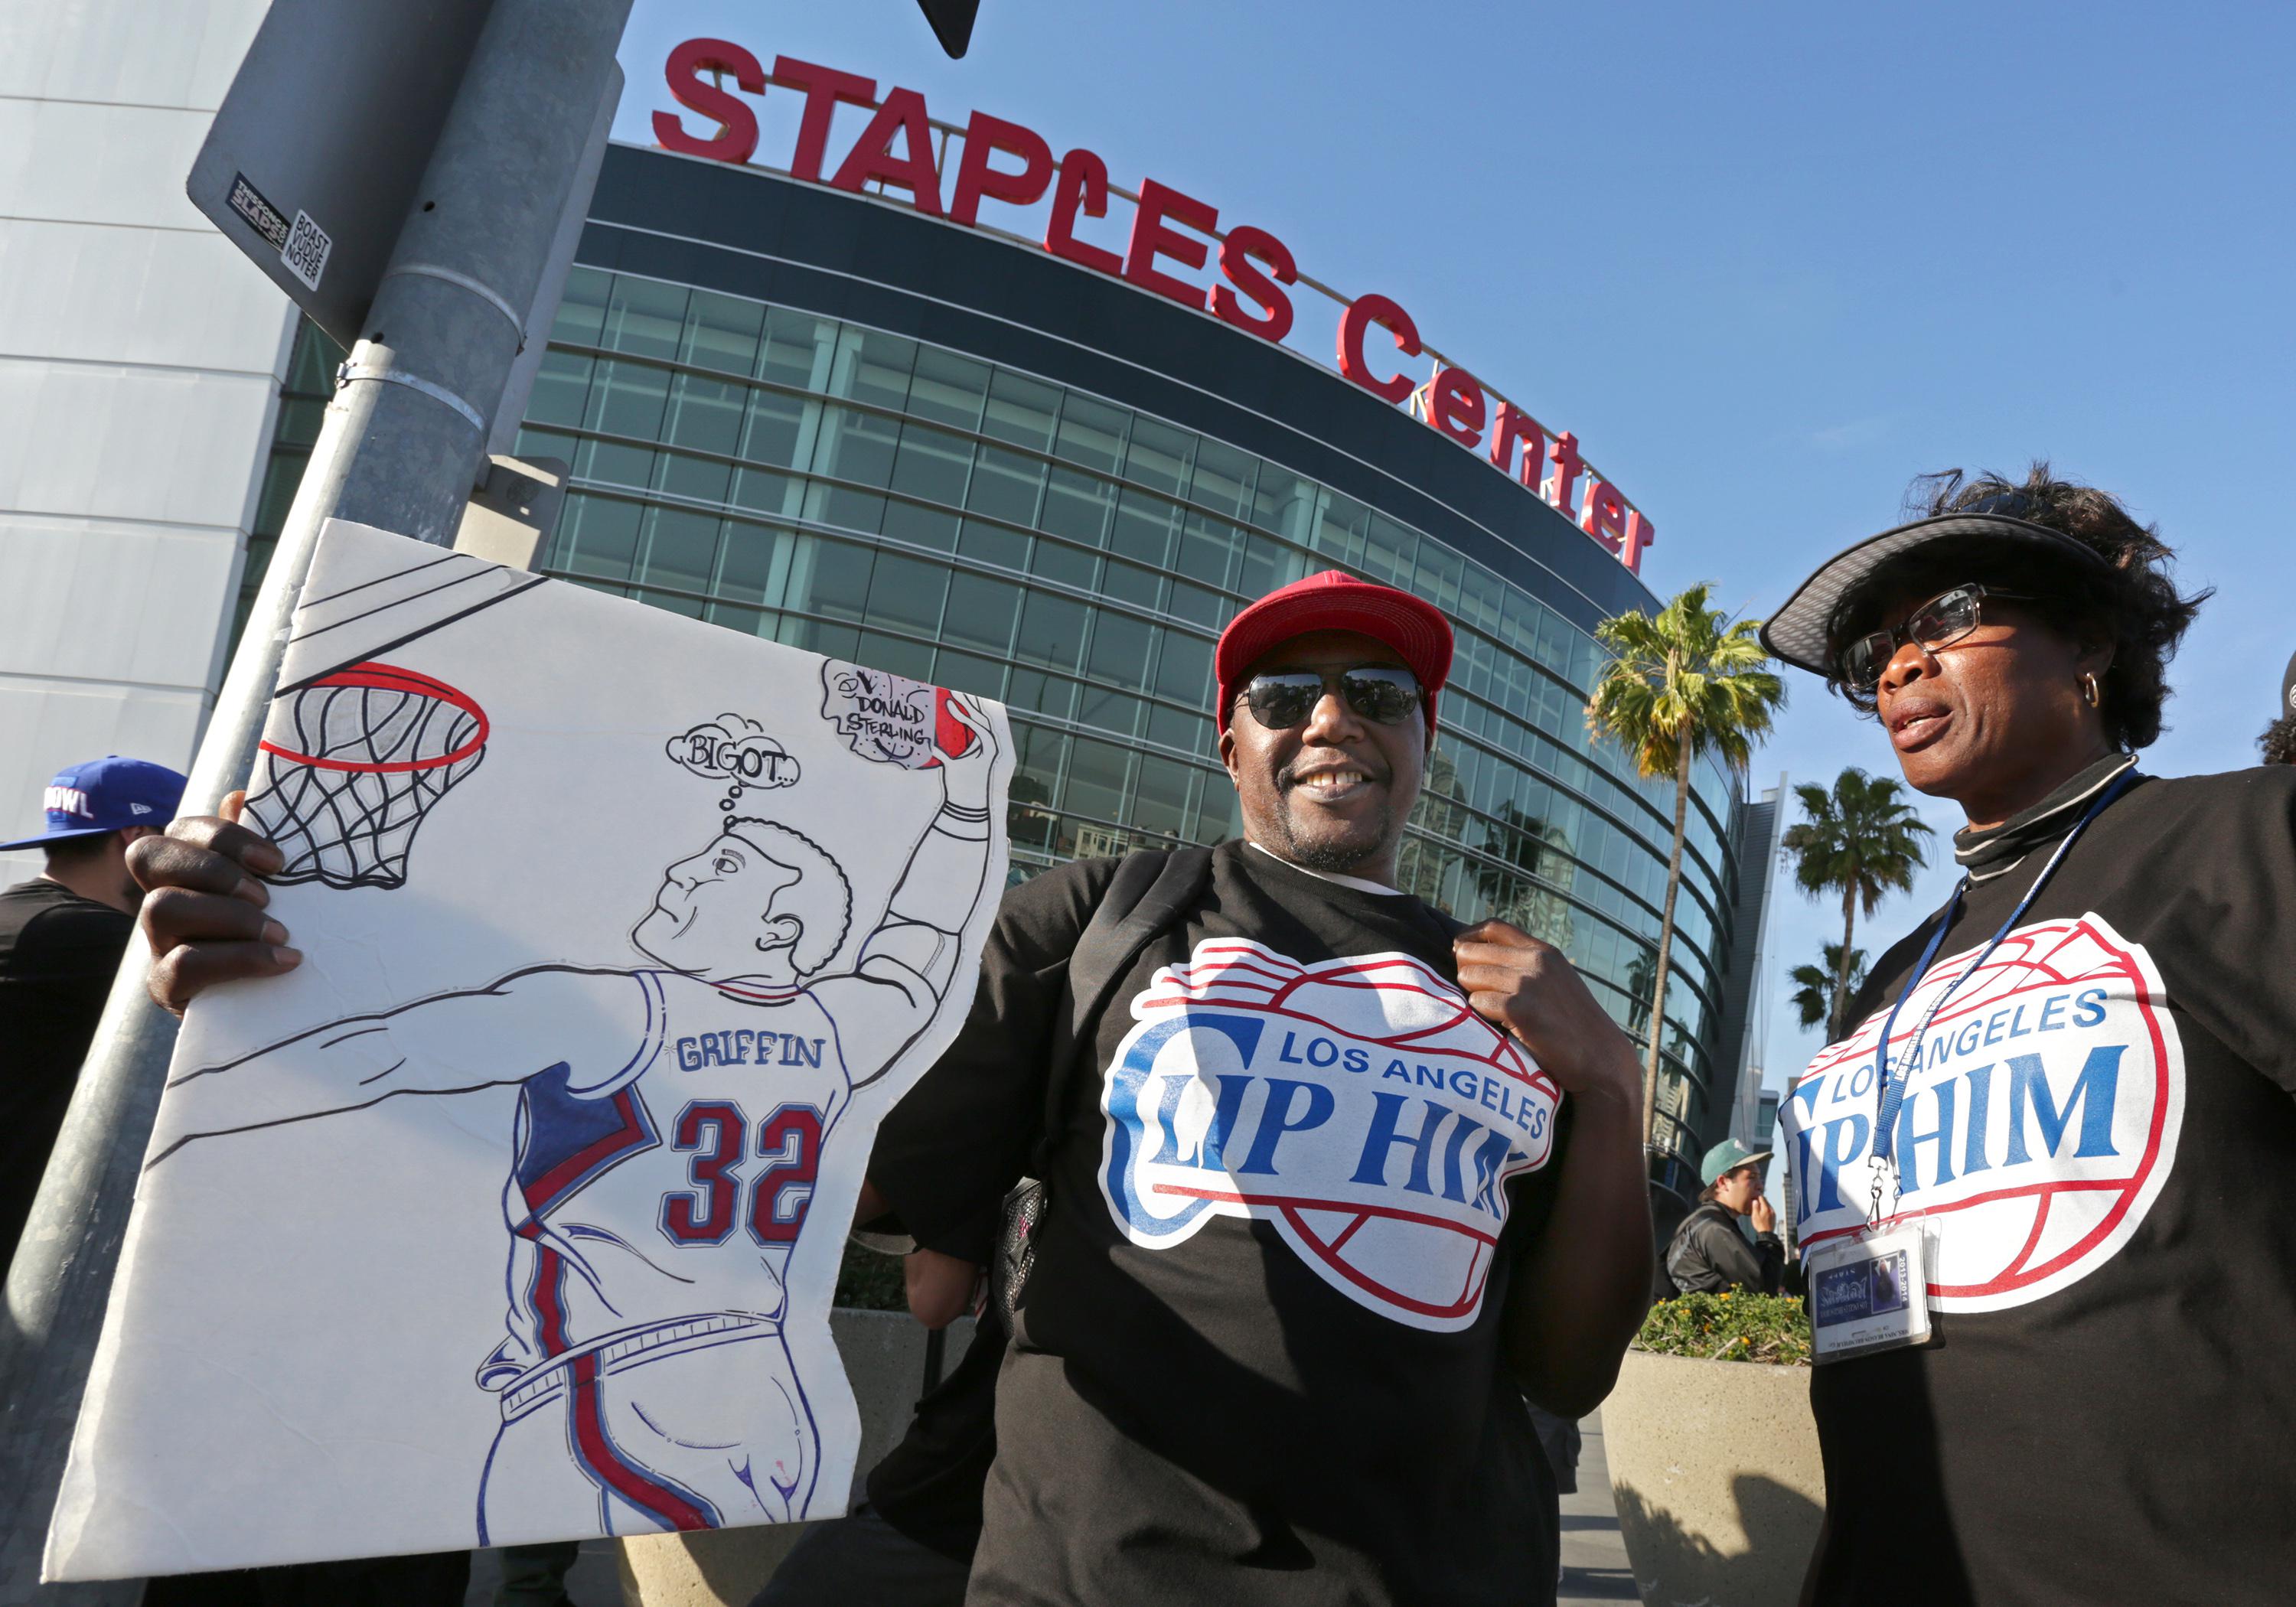 Demonstrators Protest Racist Comments Made By L.A. Clippers Owner Donald Sterling Before Playoff Game